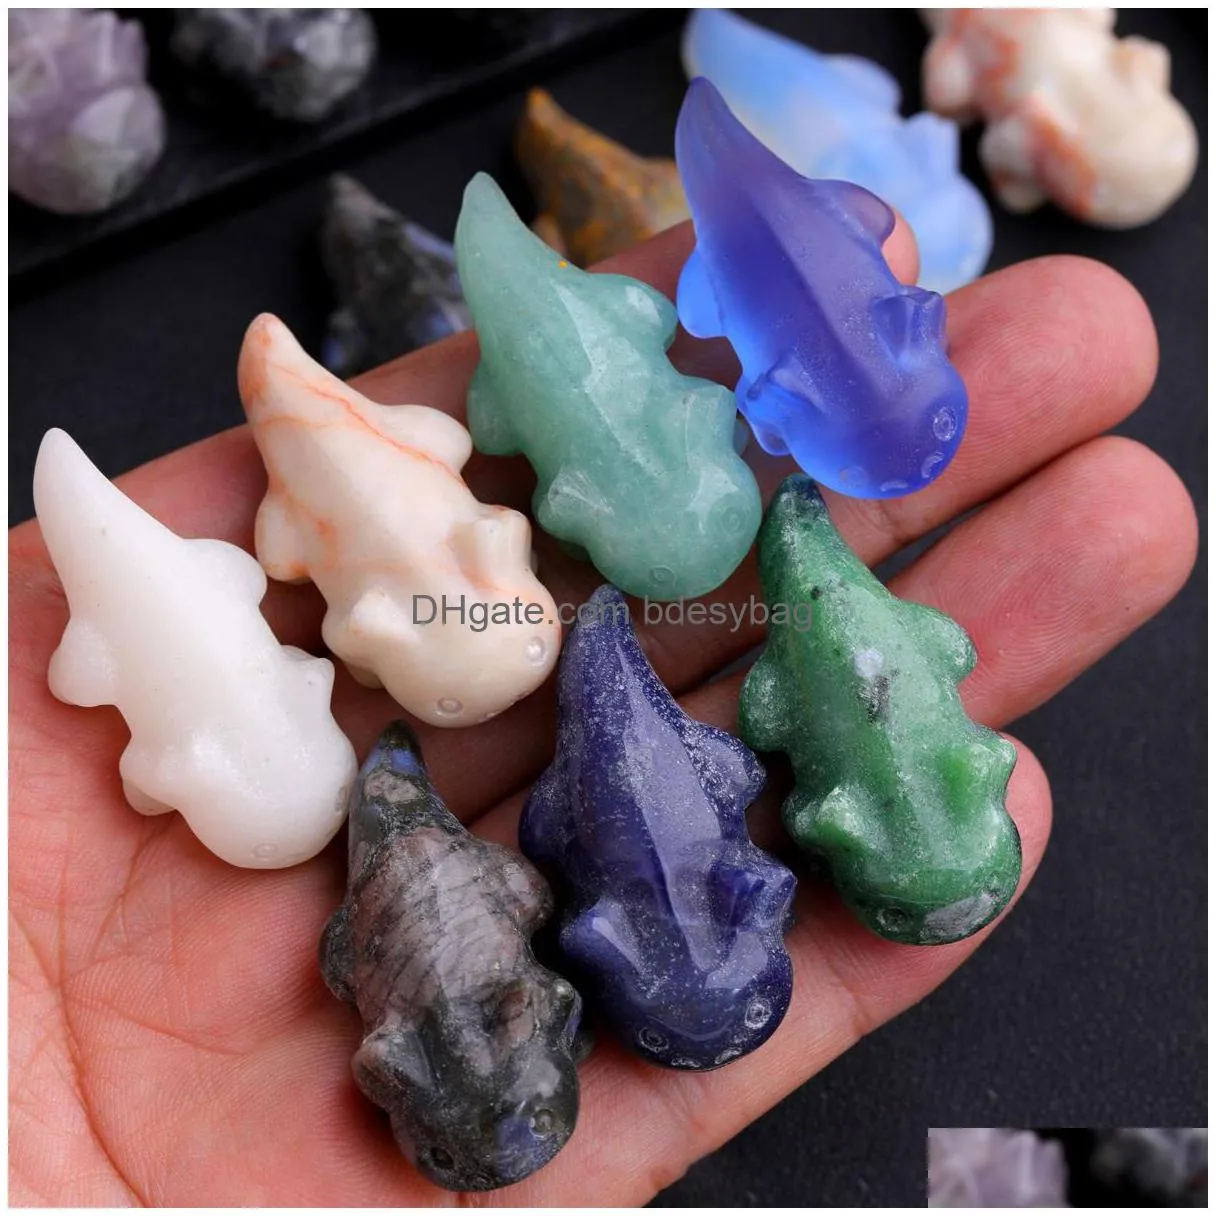 Stone Nt Salamander Fish Statue Natural Stone Quartz Crystal Healing Carved Stereoscopic Crafts Office Home Desktop Drop Delivery Jewe Dhmcx